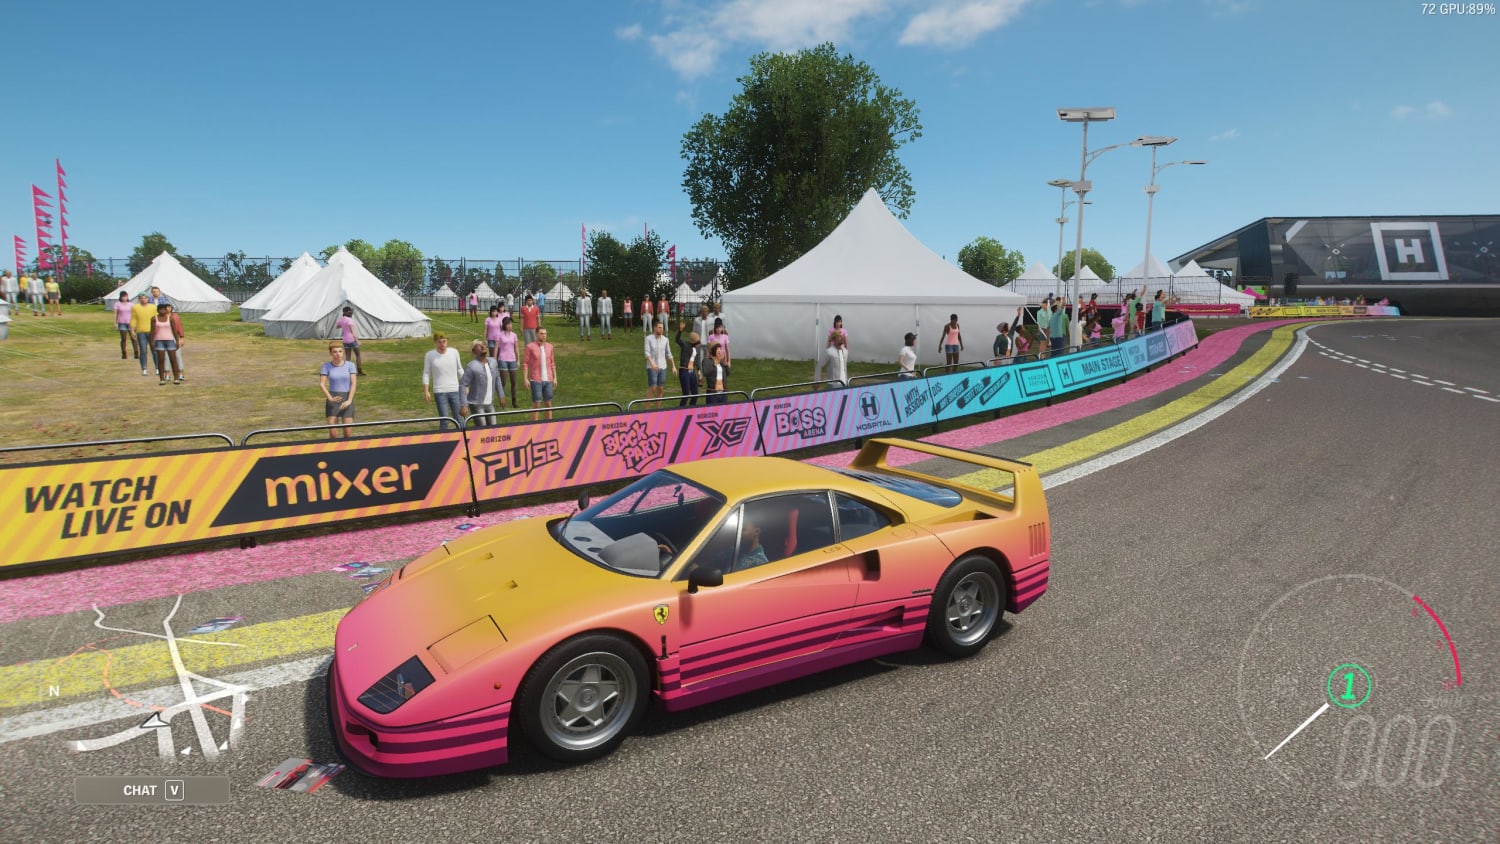 TIL Forza Horizon 4 takes place in an alternate universe where mixer was actually successful